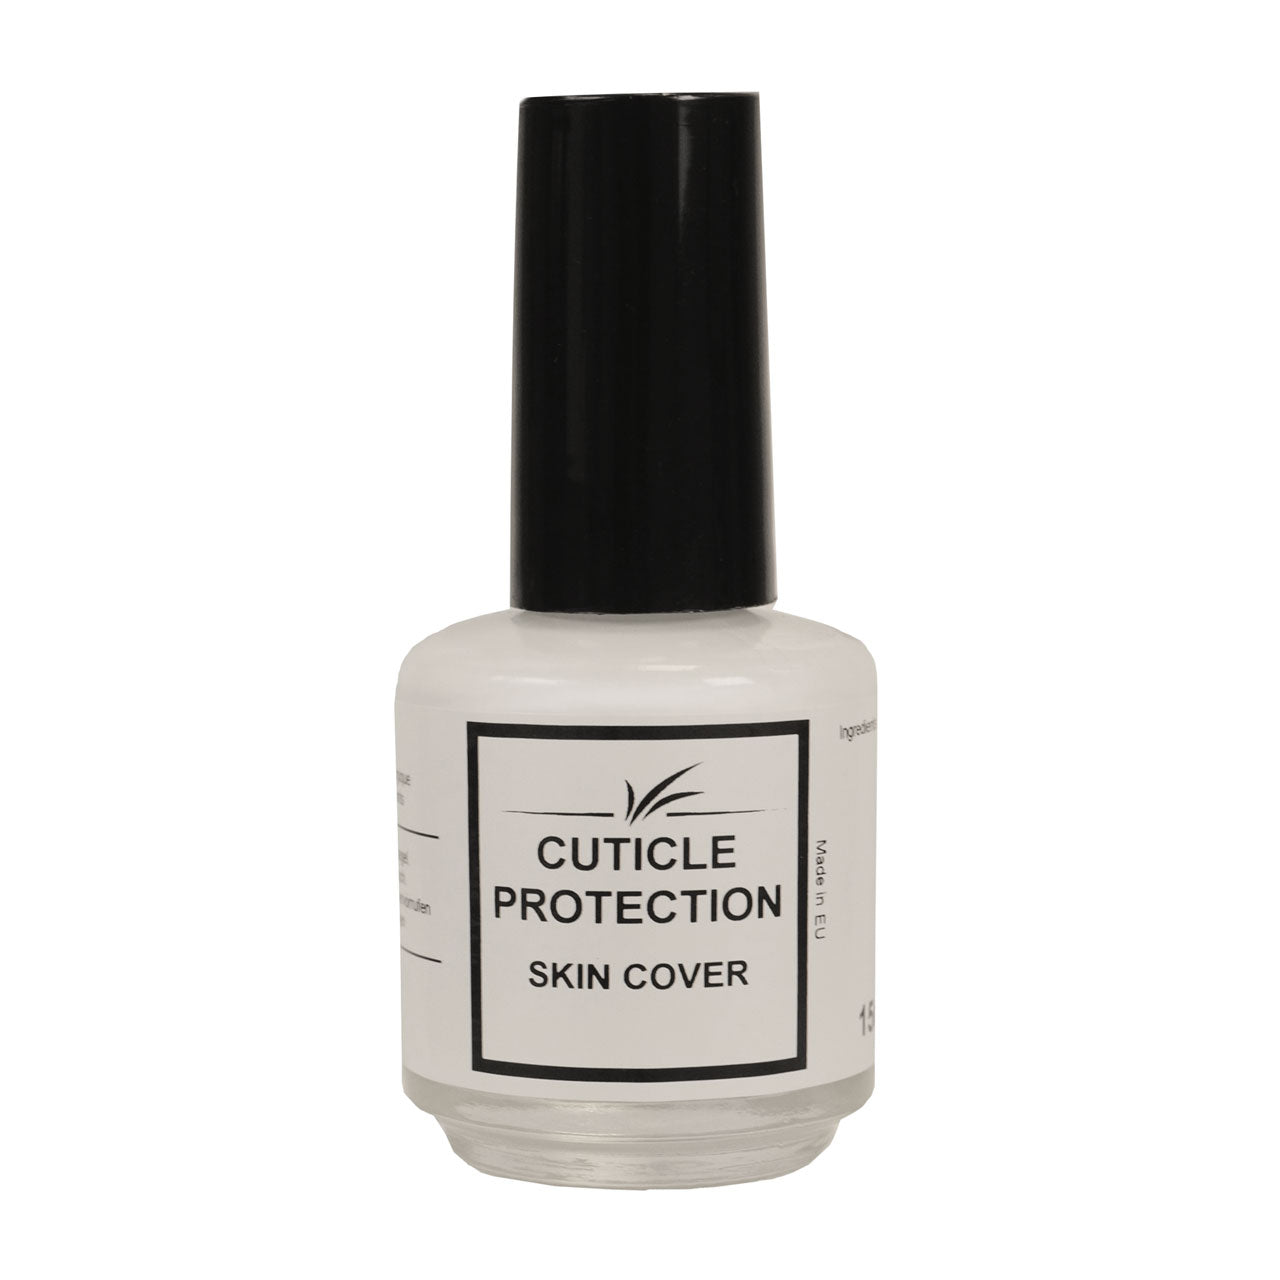 Cuticle Protection Skin Cover